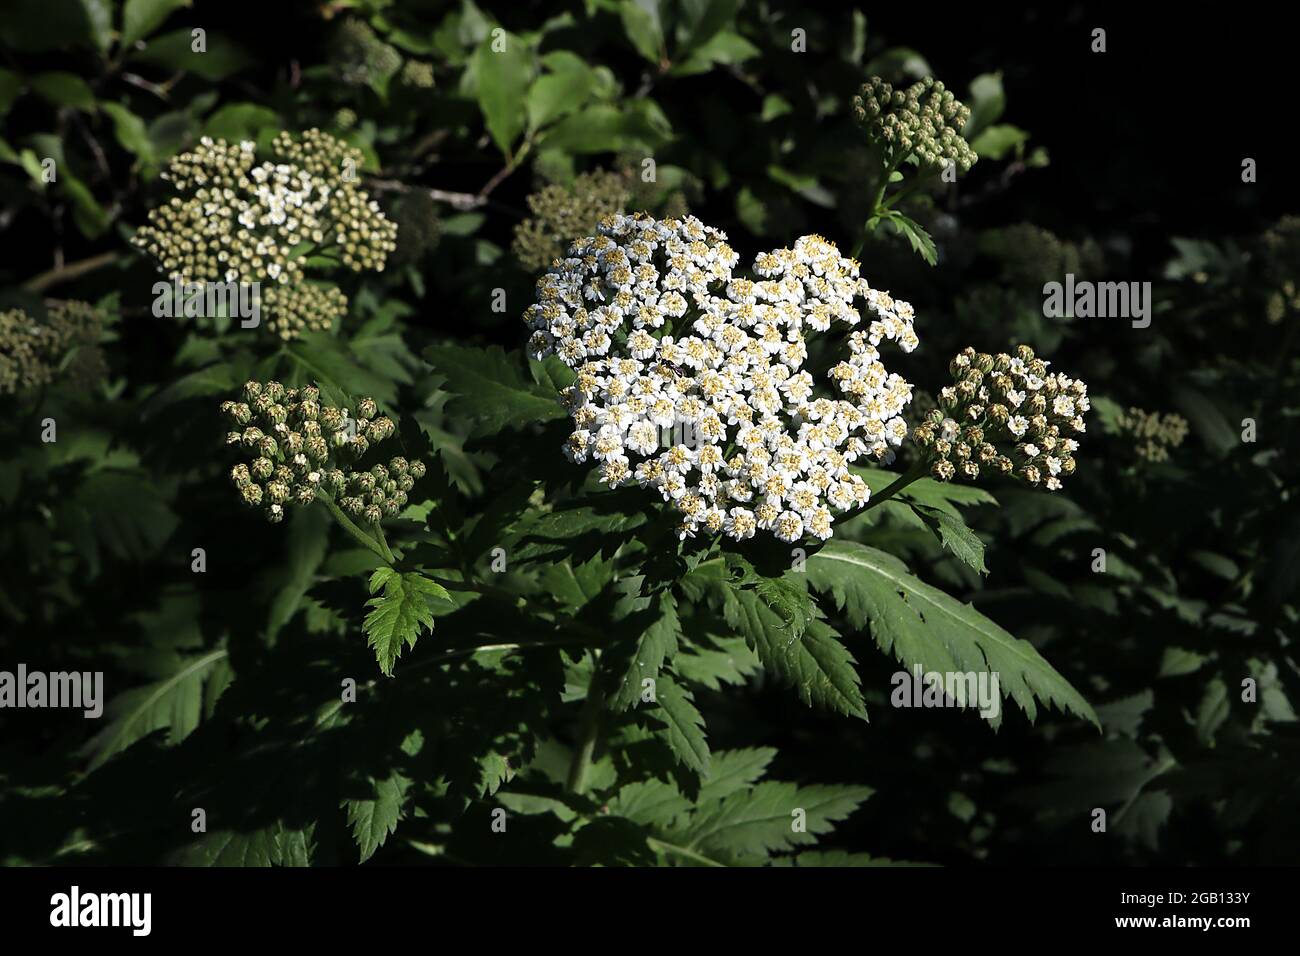 Tanacetum microphyllum feverfew microphyllum – domed clusters of tiny white flowers atop large lobed leaves on tall stems,  June, England, UK Stock Photo